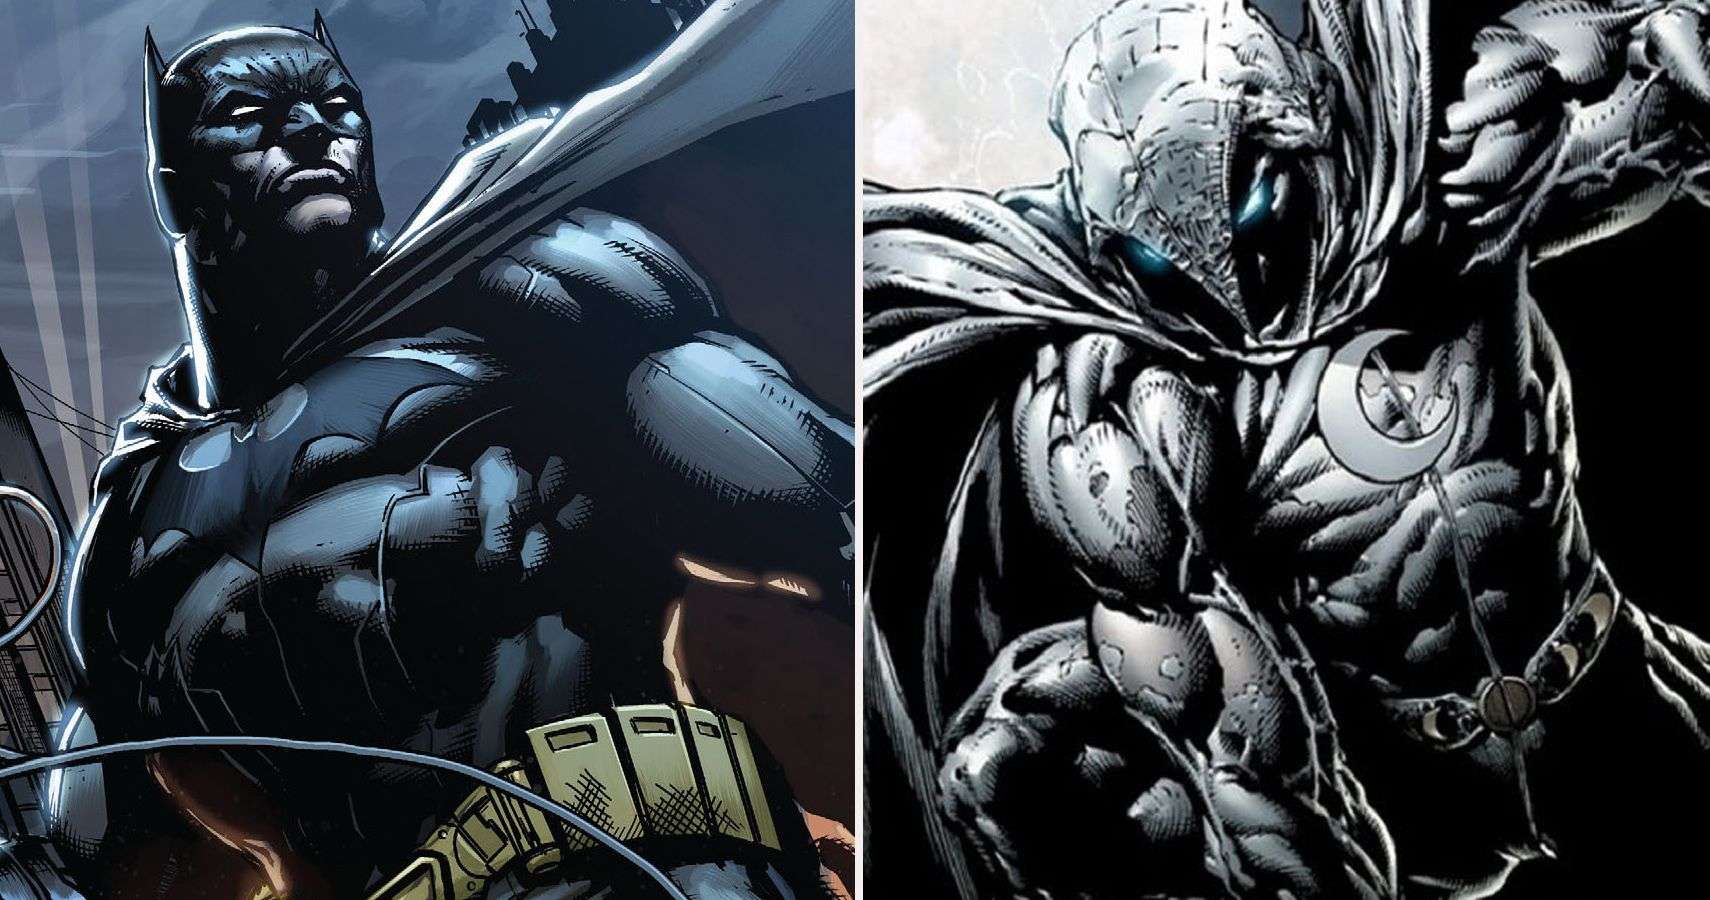 Moon Knight Has Tech that Would Give Batman a Run for His Money